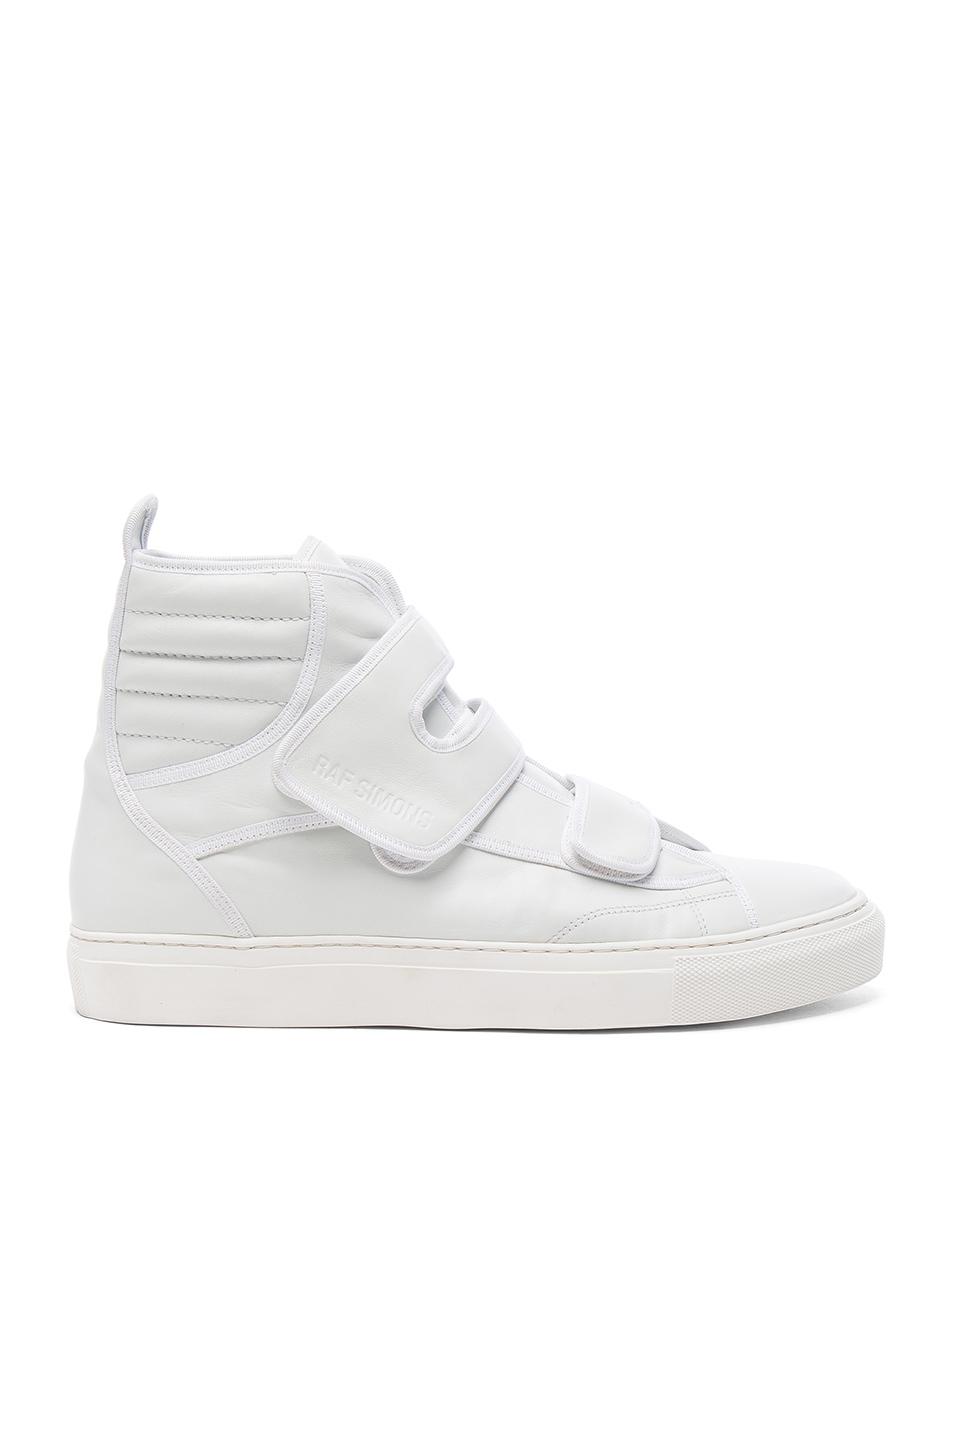 pen Portugees Geest Raf Simons High Top Velcro Sneakers in White | Lyst